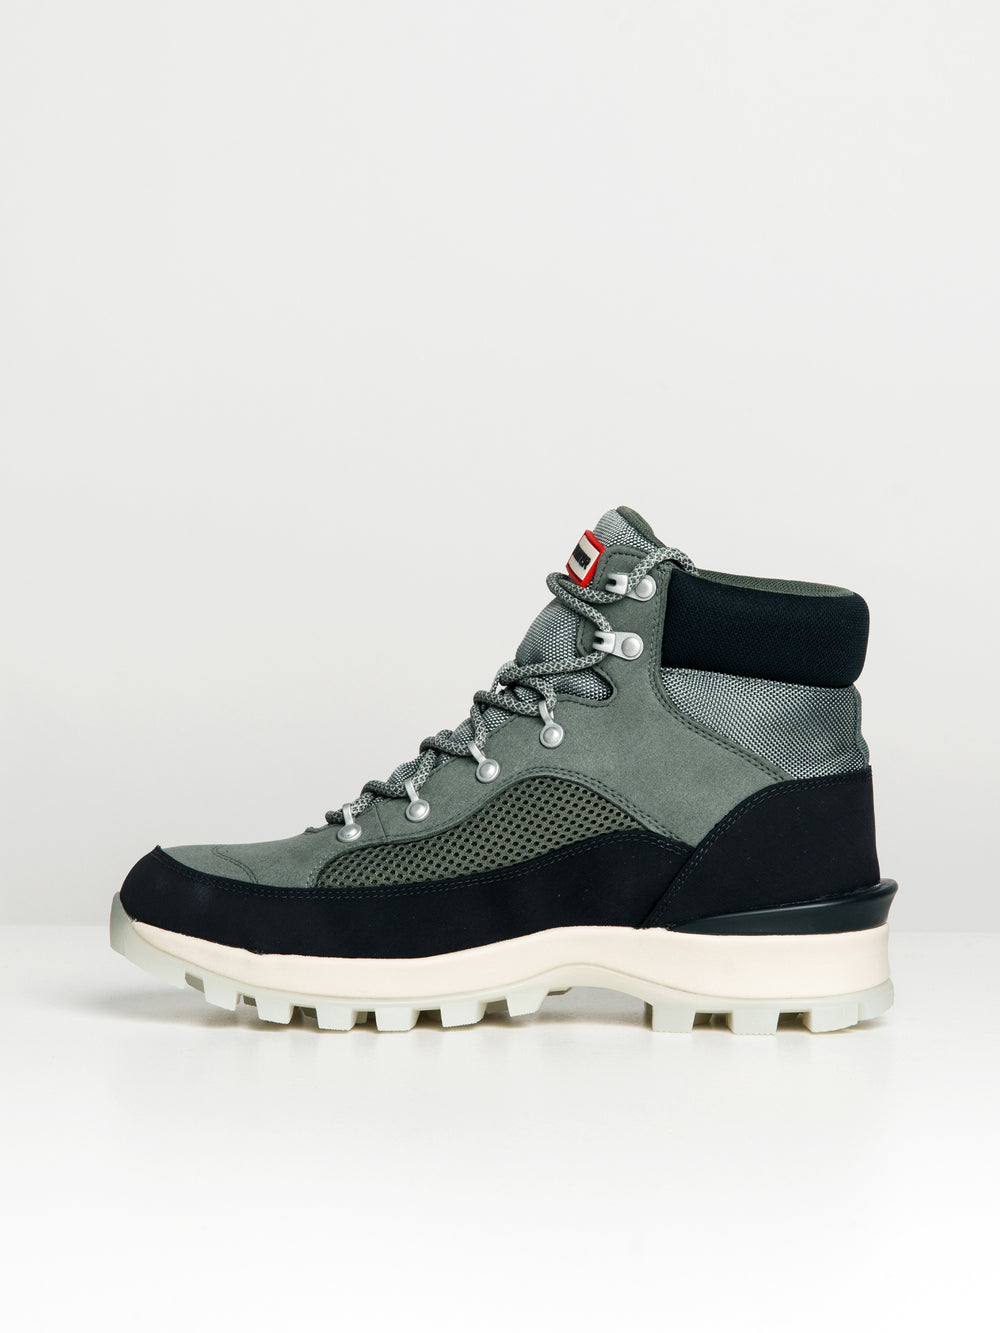 HUNTER EXPLORER MID LACE BOOT - CLEARANCE